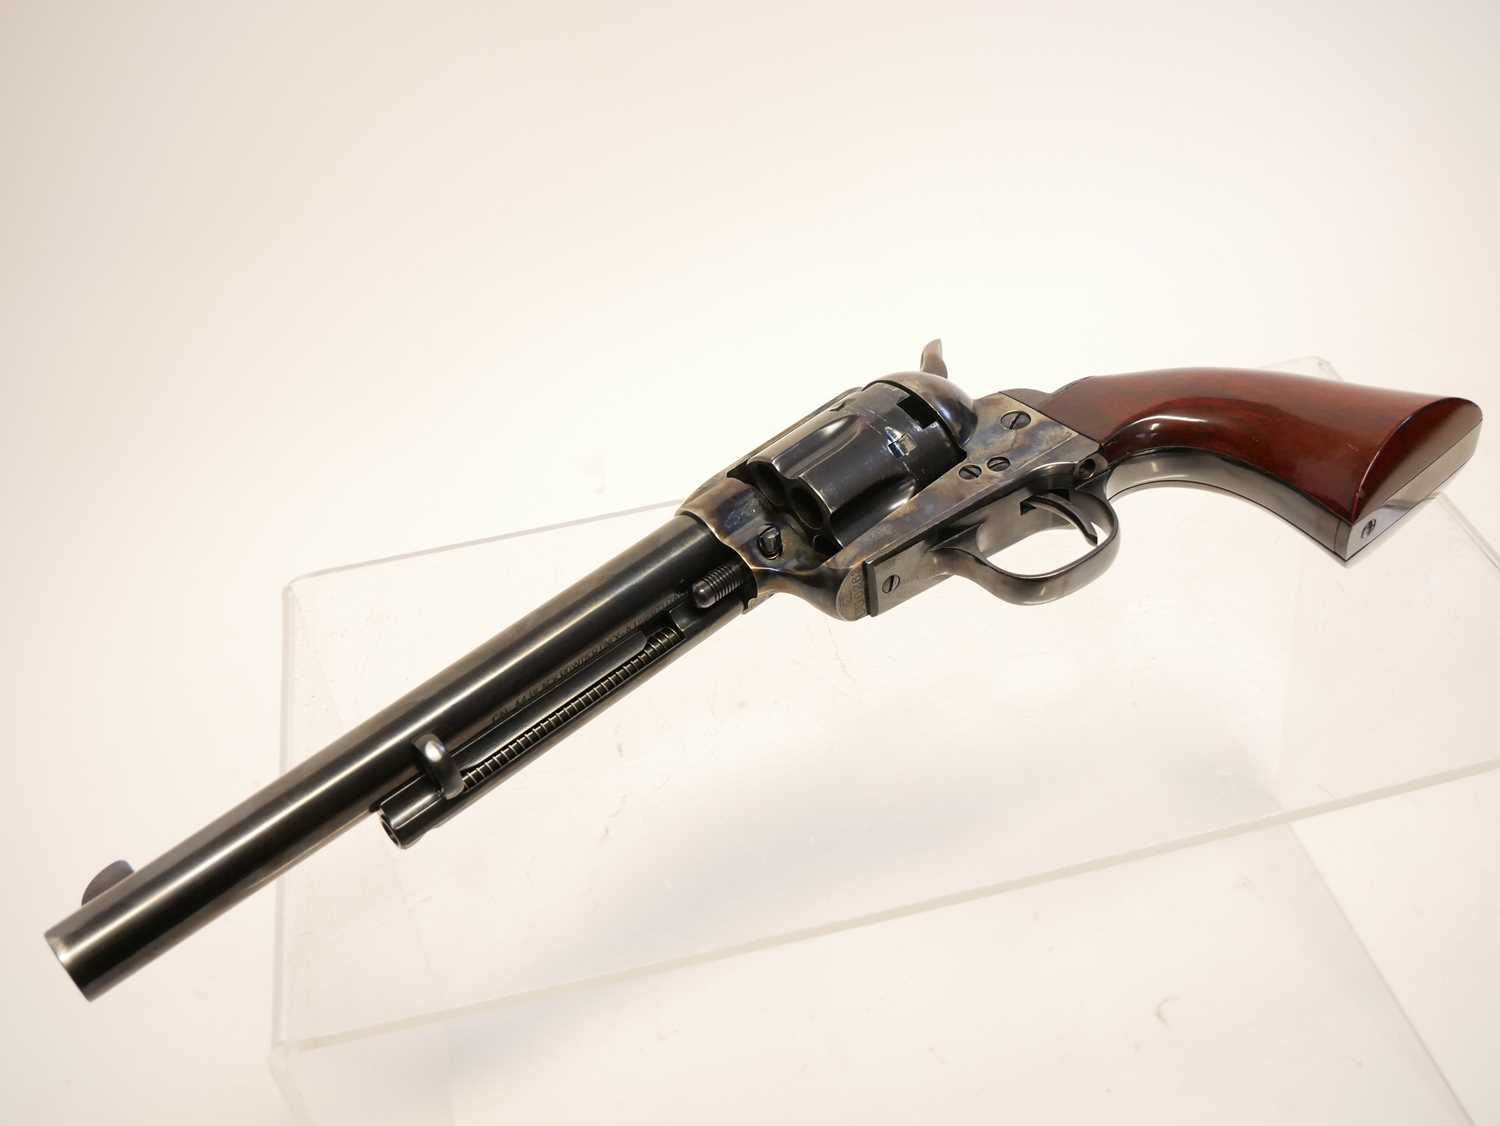 Uberti .44 percussion muzzle loading cattleman revolver, serial number UG0263, 7.5inch barrel, - Image 6 of 10